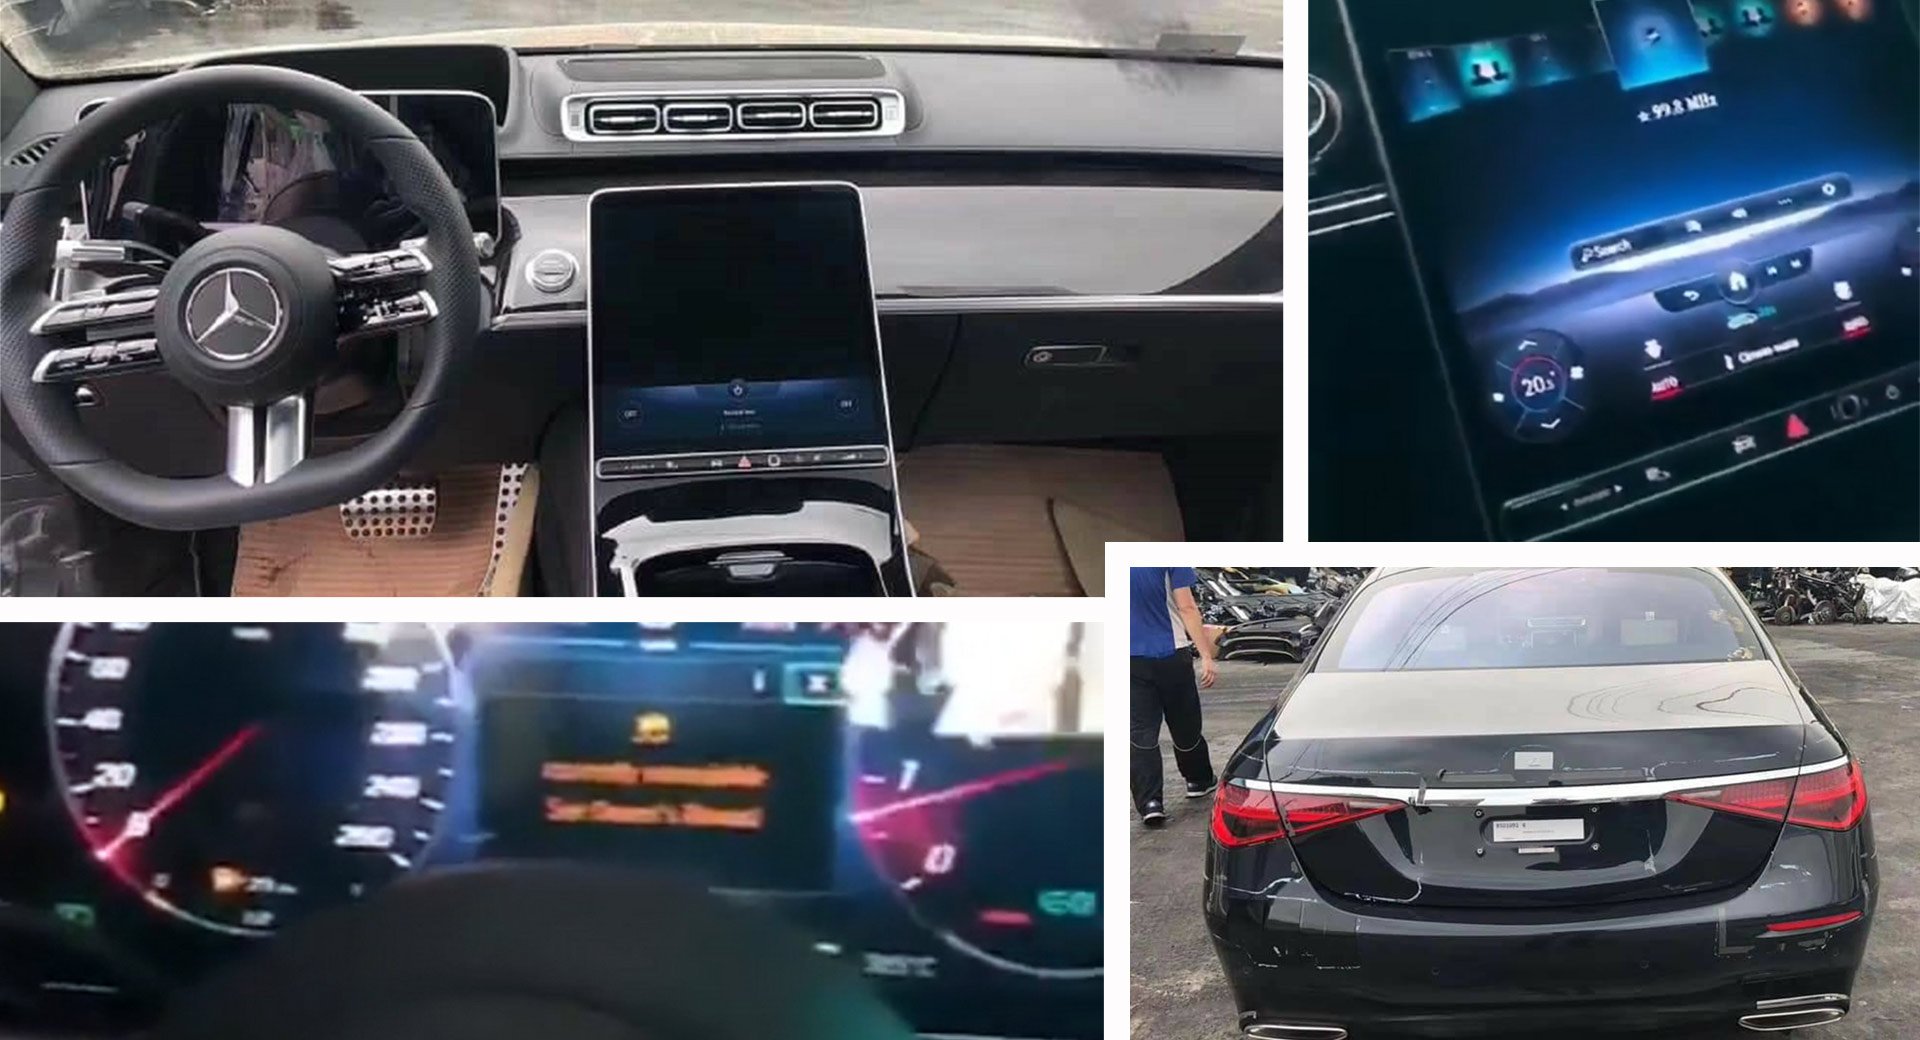 2021 Mercedes Benz S Class Reveals Interior And Exterior In New Leaked Photos Video Carscoops